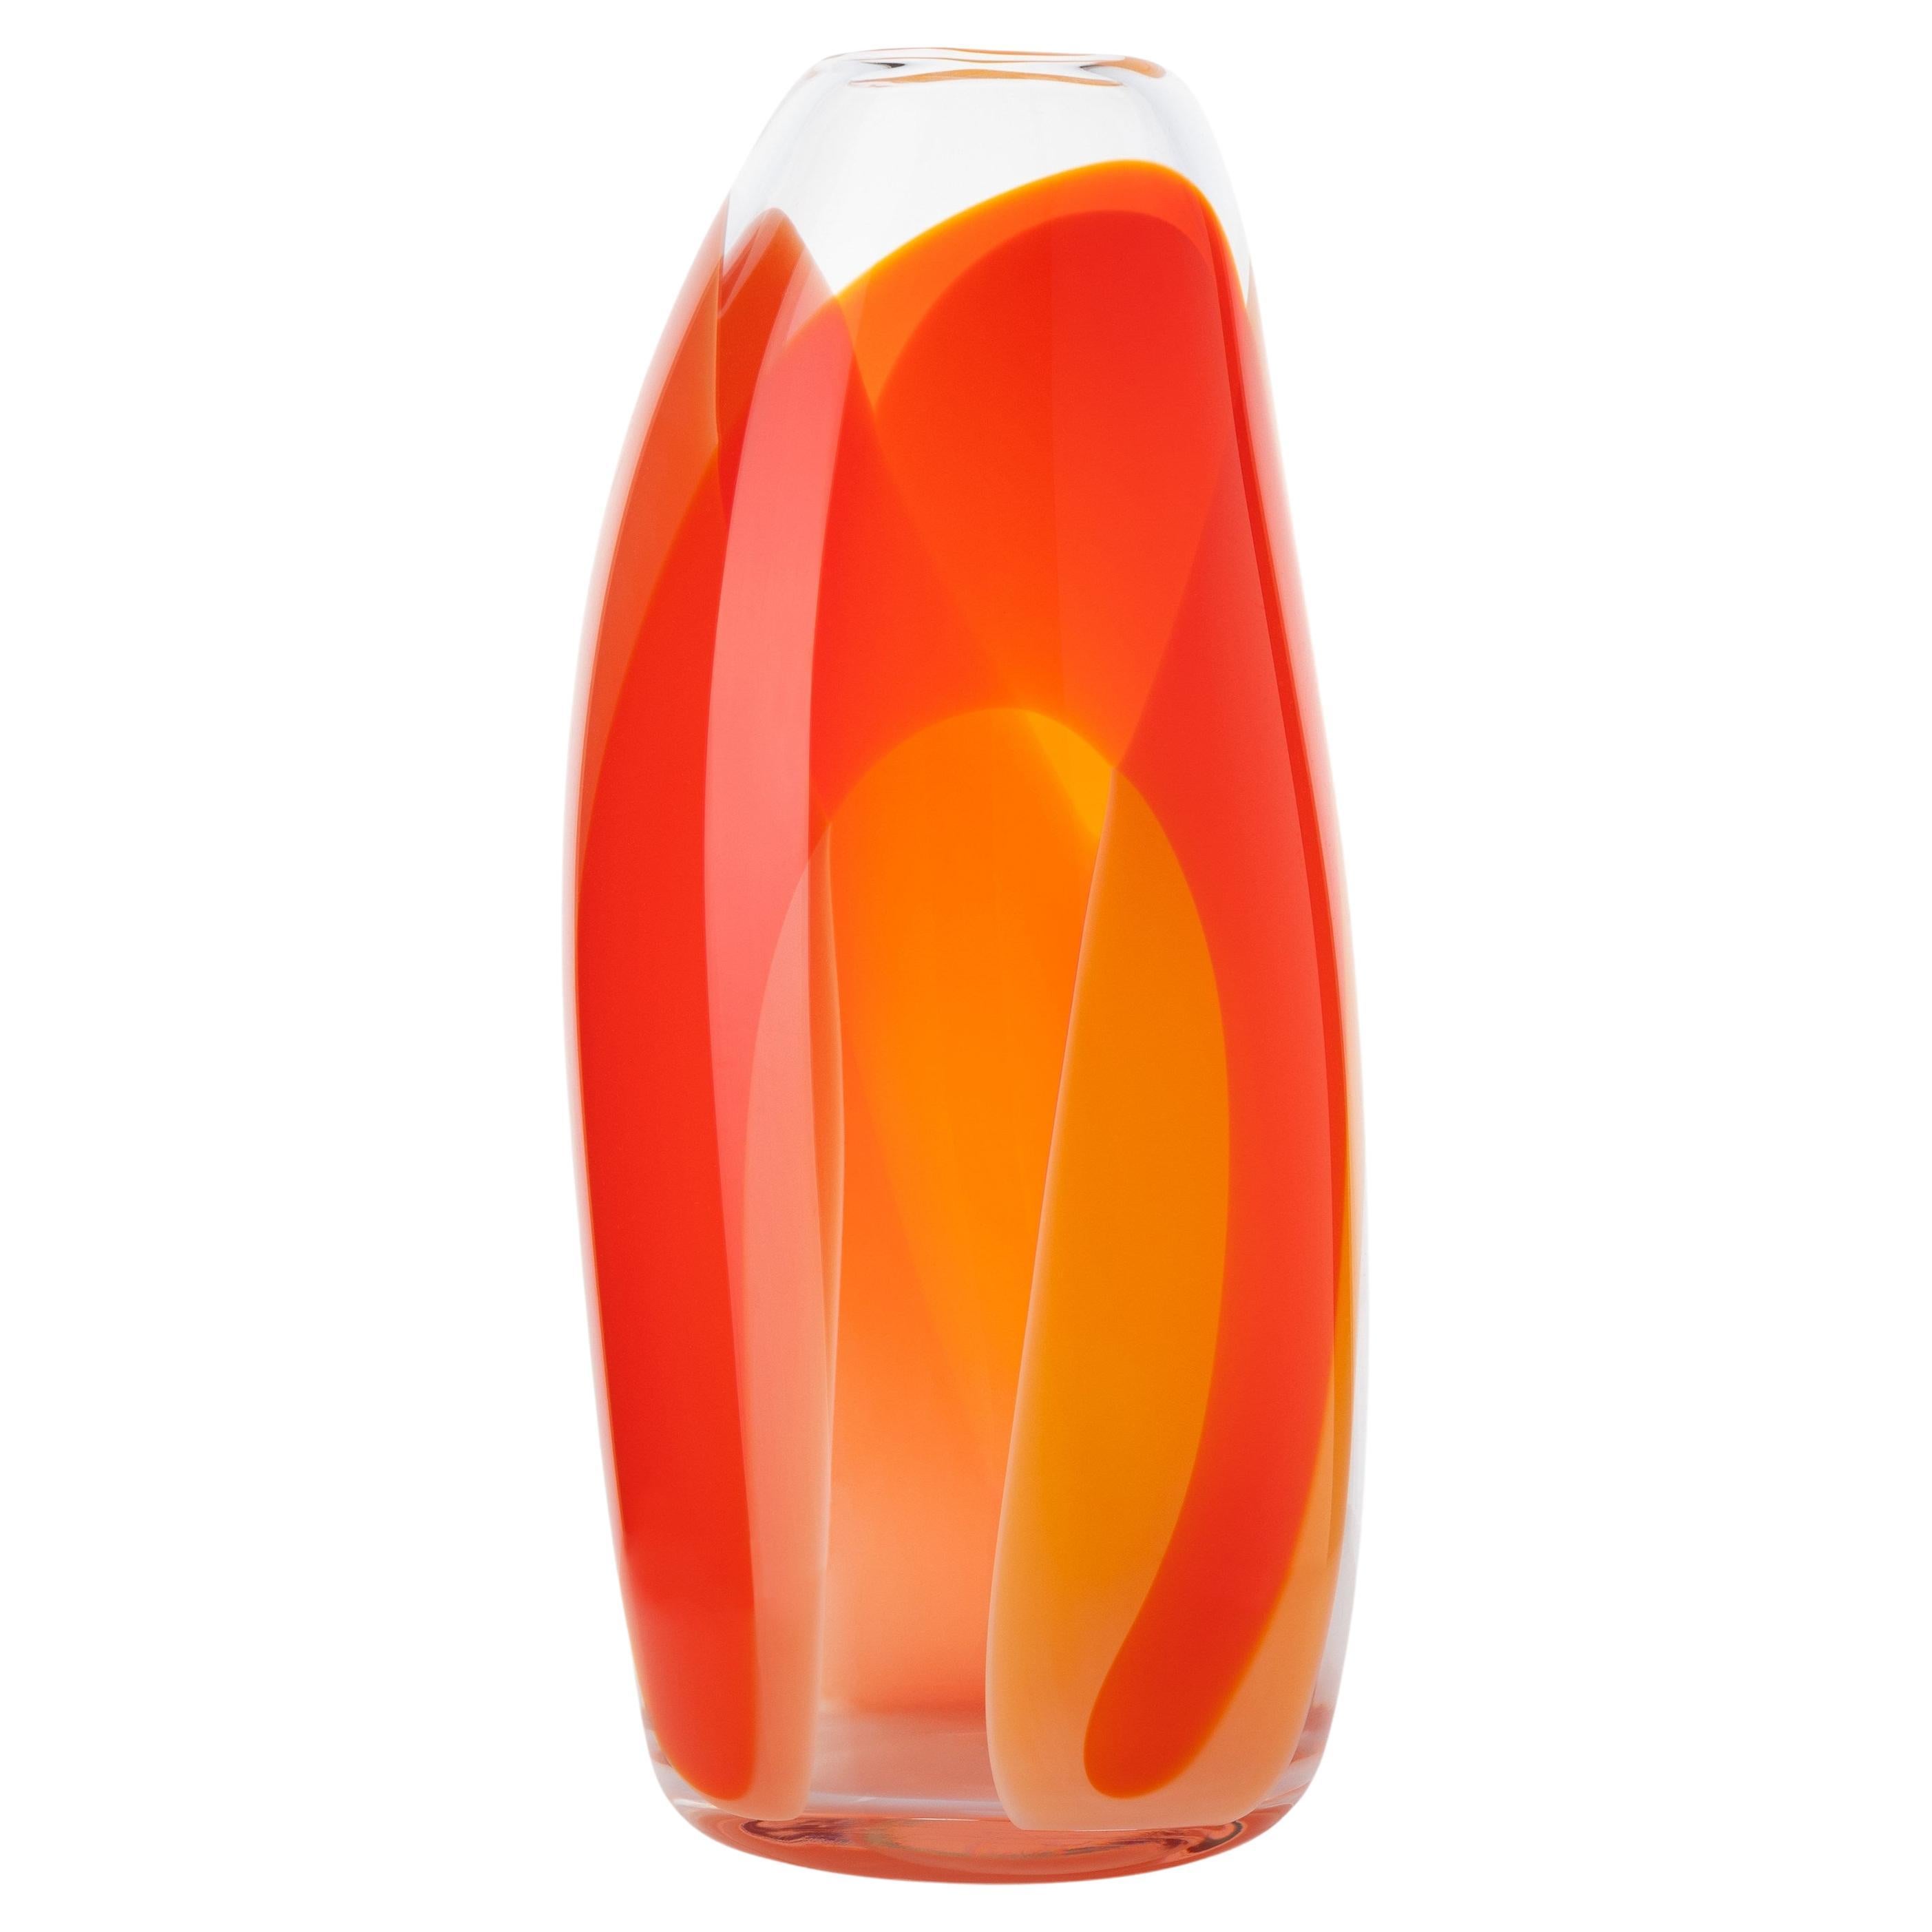 Waves No 466, clear, red & rich yellow abstract fluid glass vase by Neil Wilkin For Sale